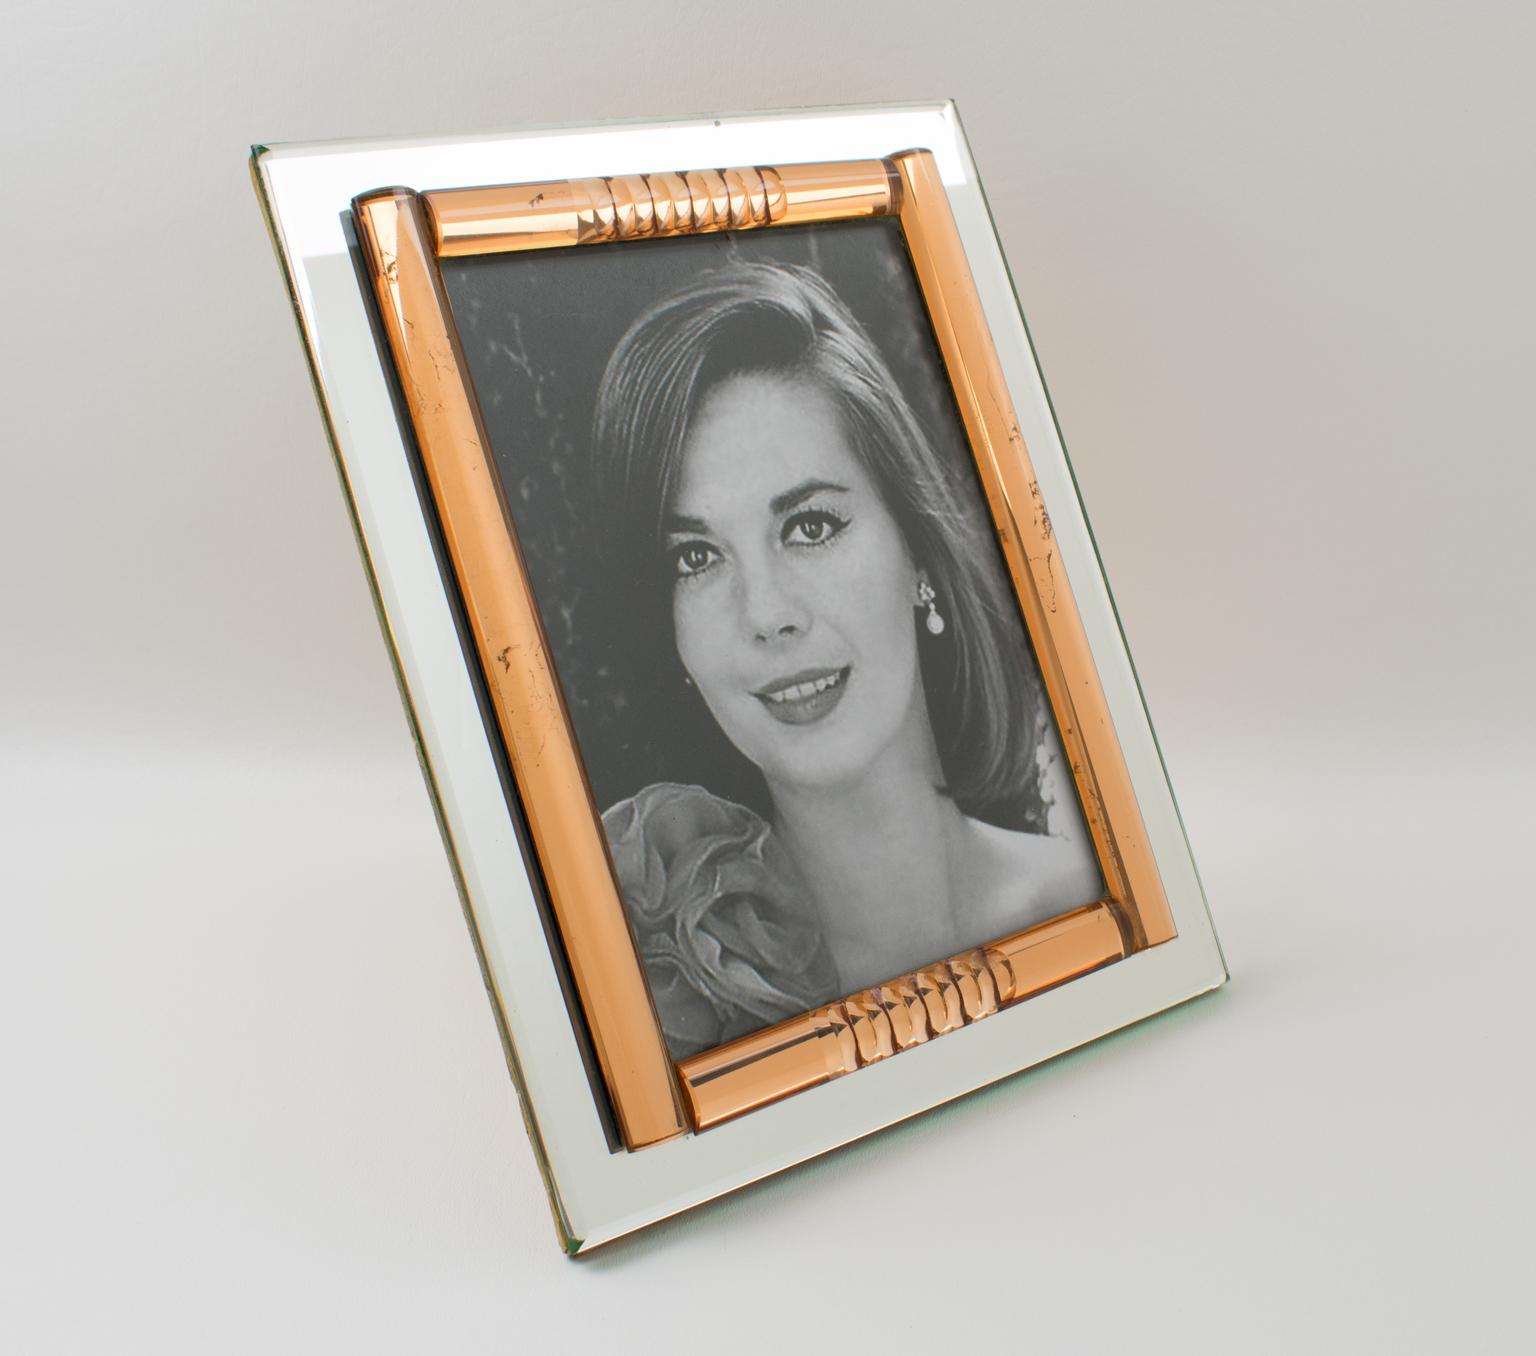 This stunning French 1940s mirror picture photo frame features a deep geometric beveling and domed sides in lovely copper or peach pink tone complimented with silver mirrored glass. The frame can be displayed either in a portrait or landscape